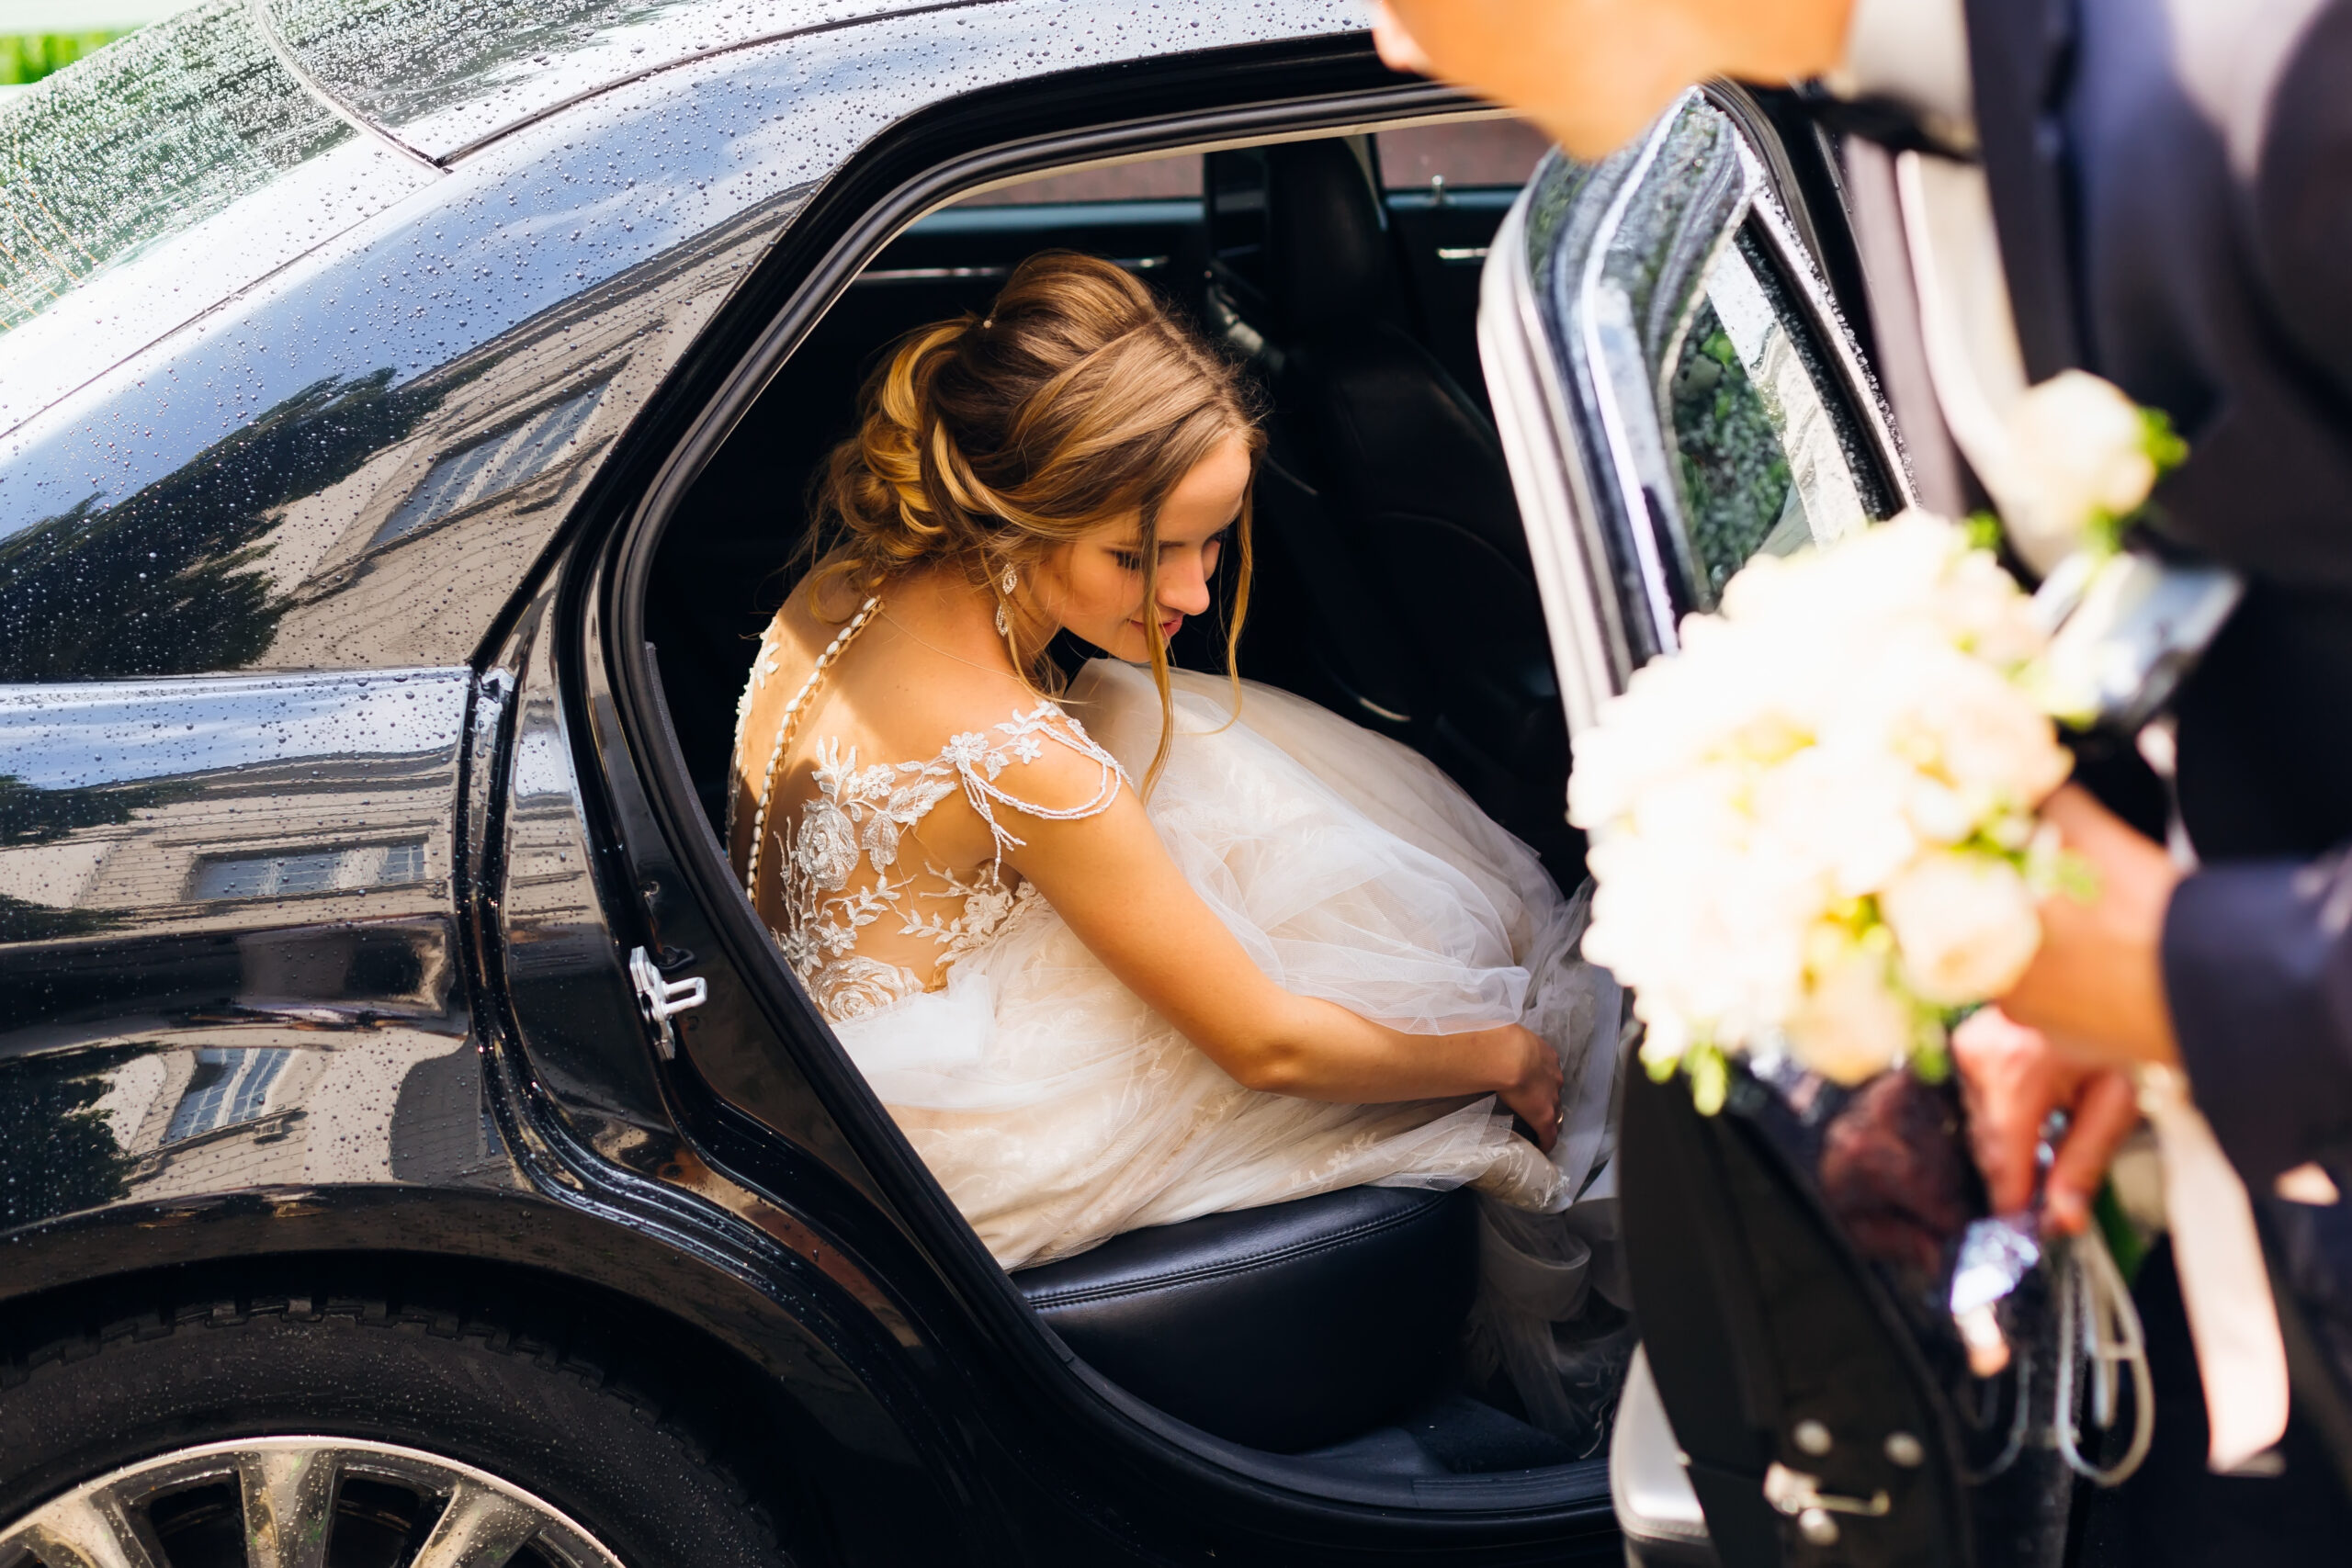 the beautiful bride sits in a black car and the groom wants to close the door after